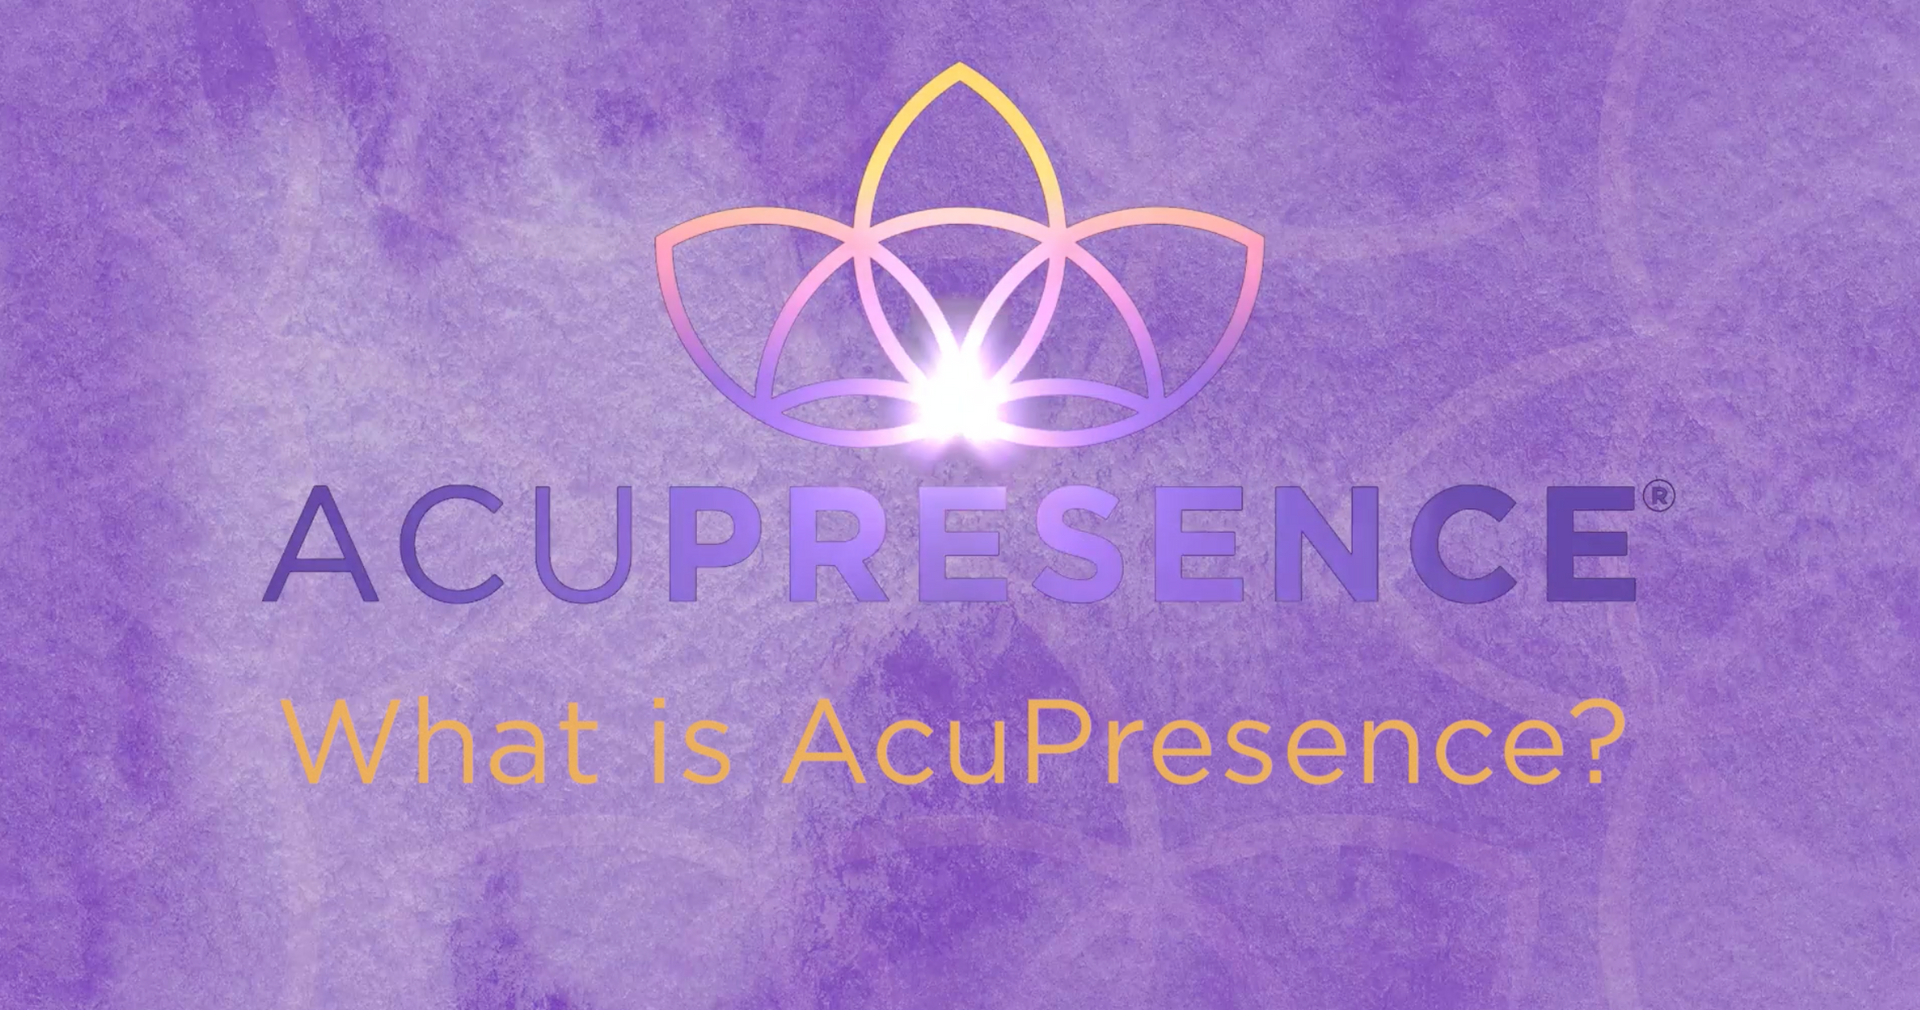 Load video: About AcuPresence